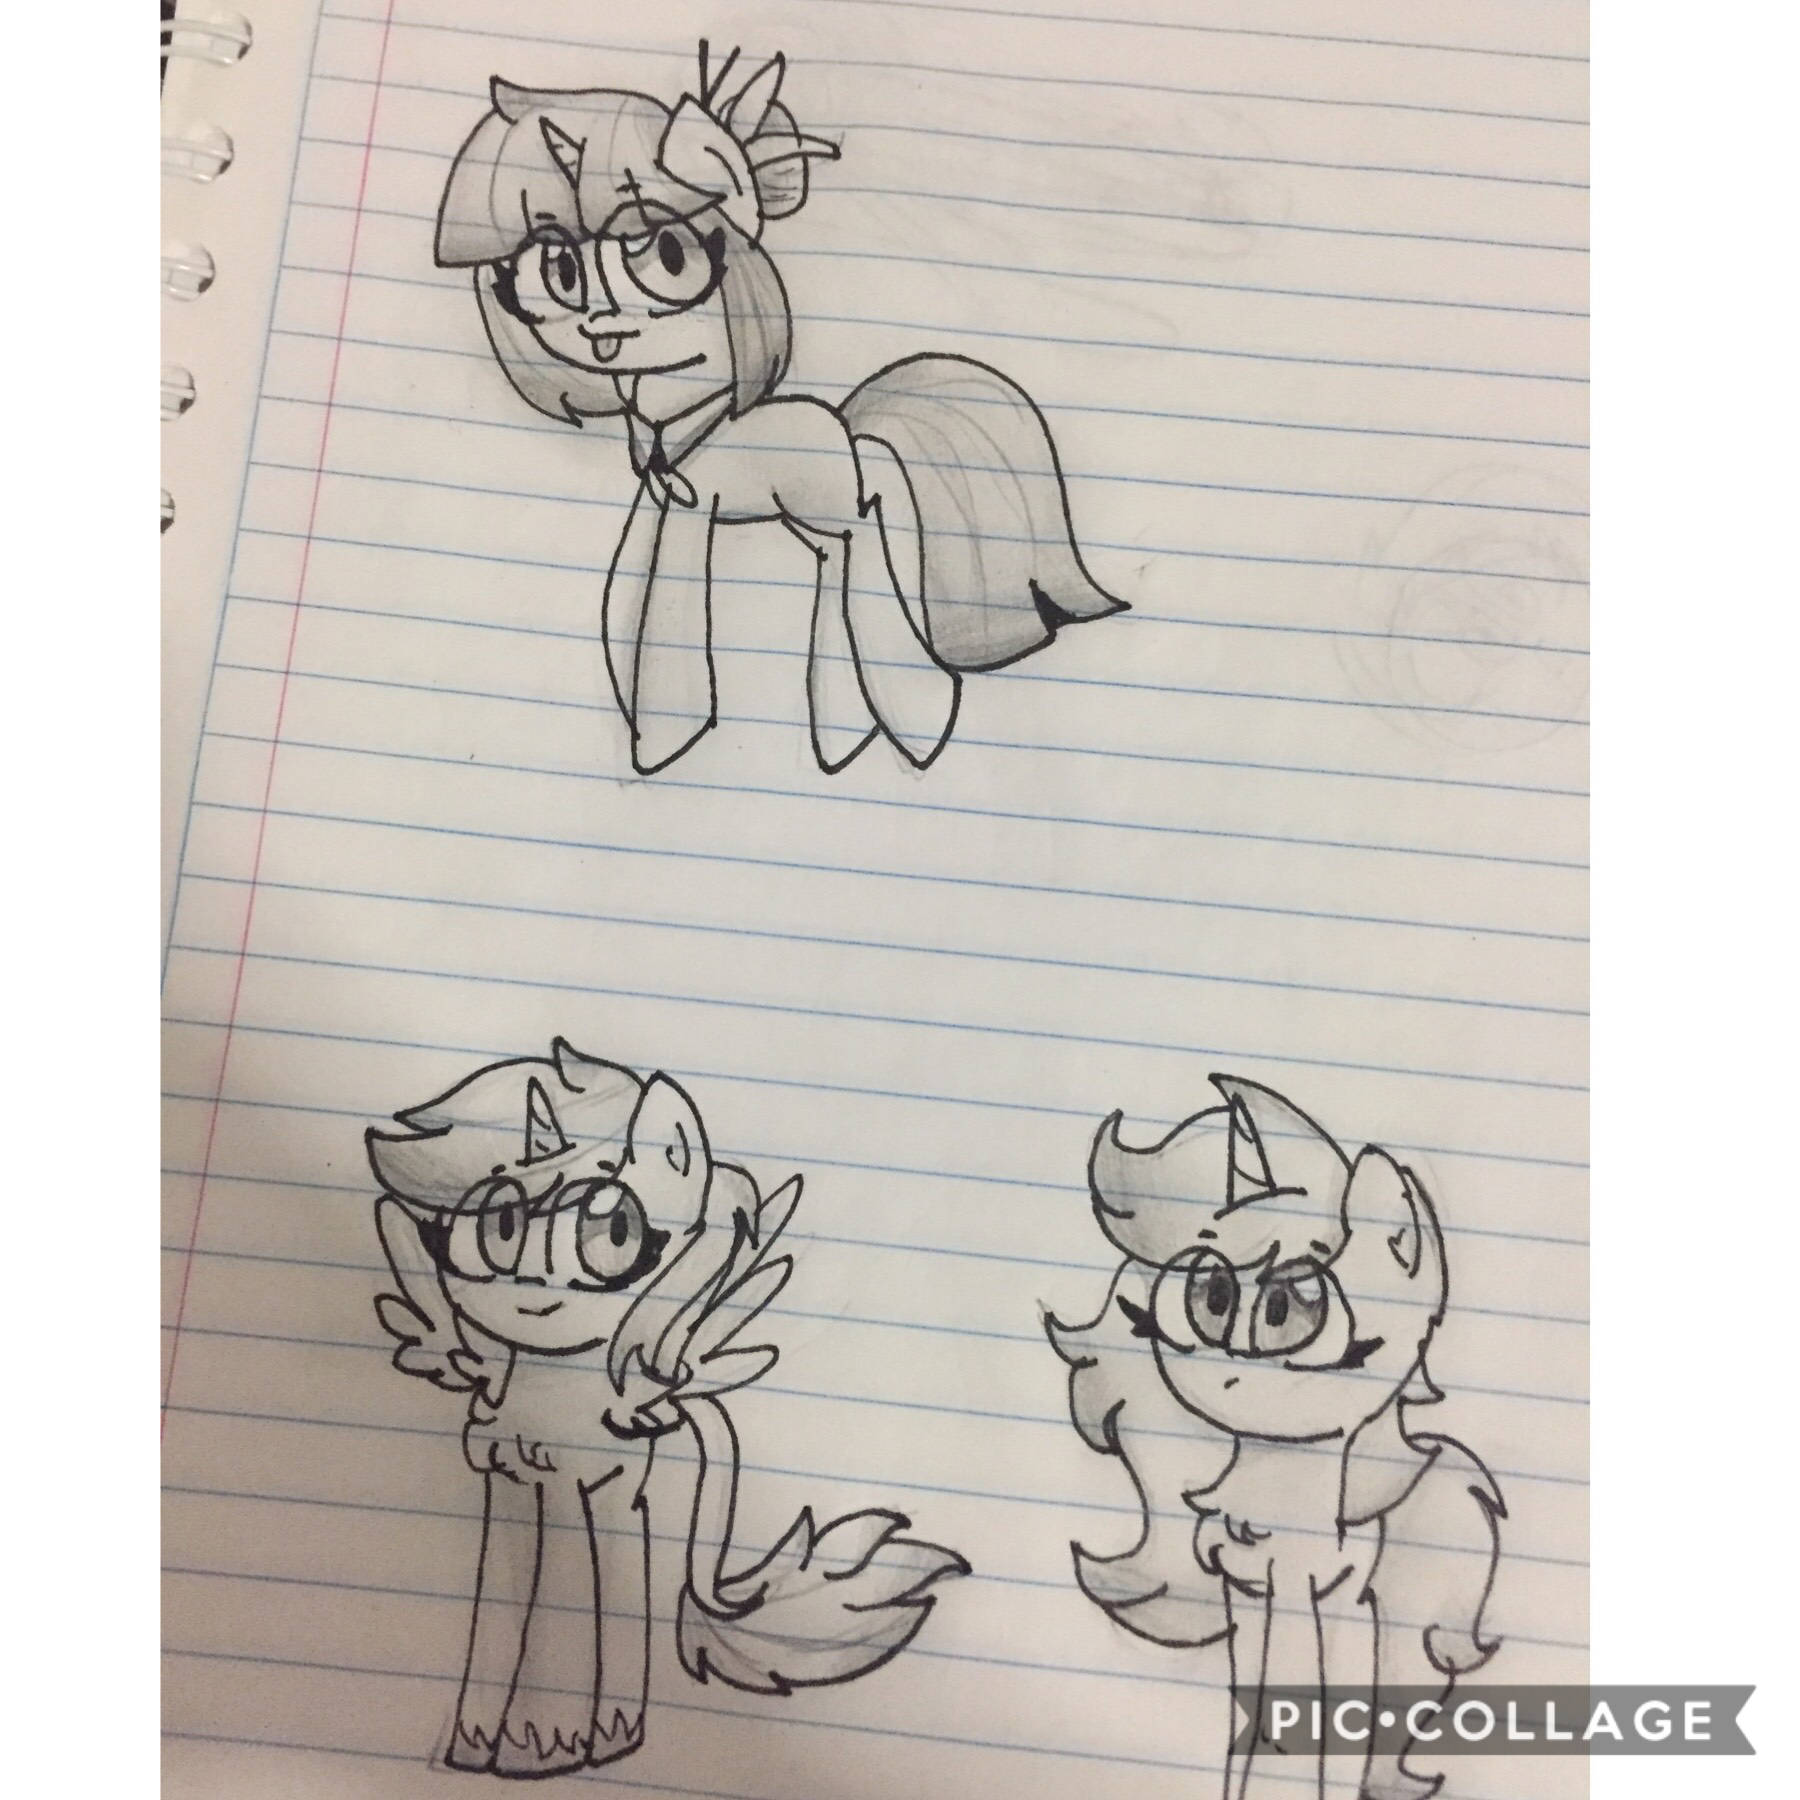 Aa some rAndoM doodles i did :b
The bottom ones are from WillowMoon and Tinkeregirl uwu
